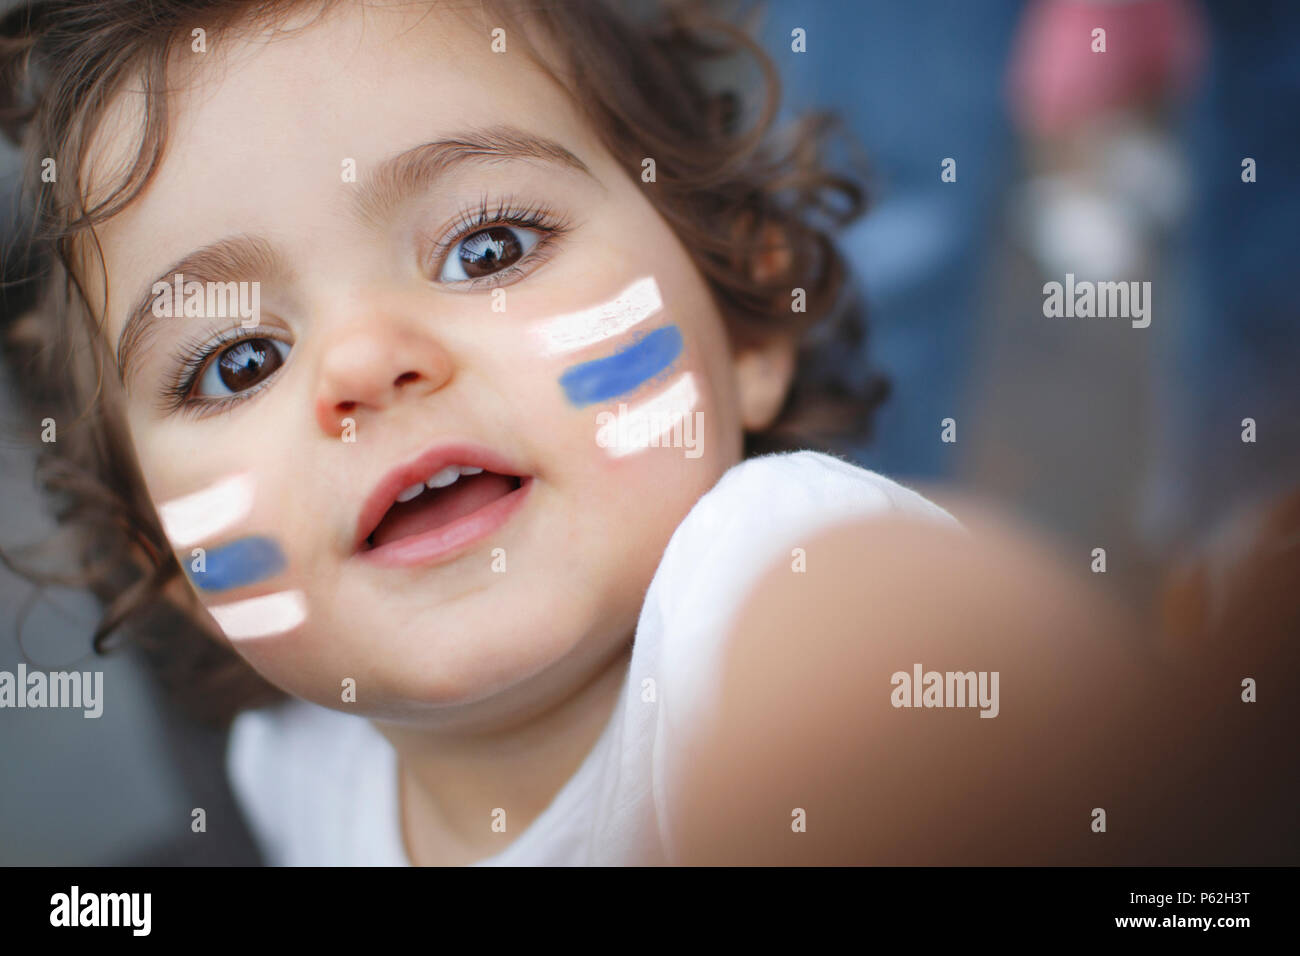 Kid fan with white and blue flag painted on face Stock Photo